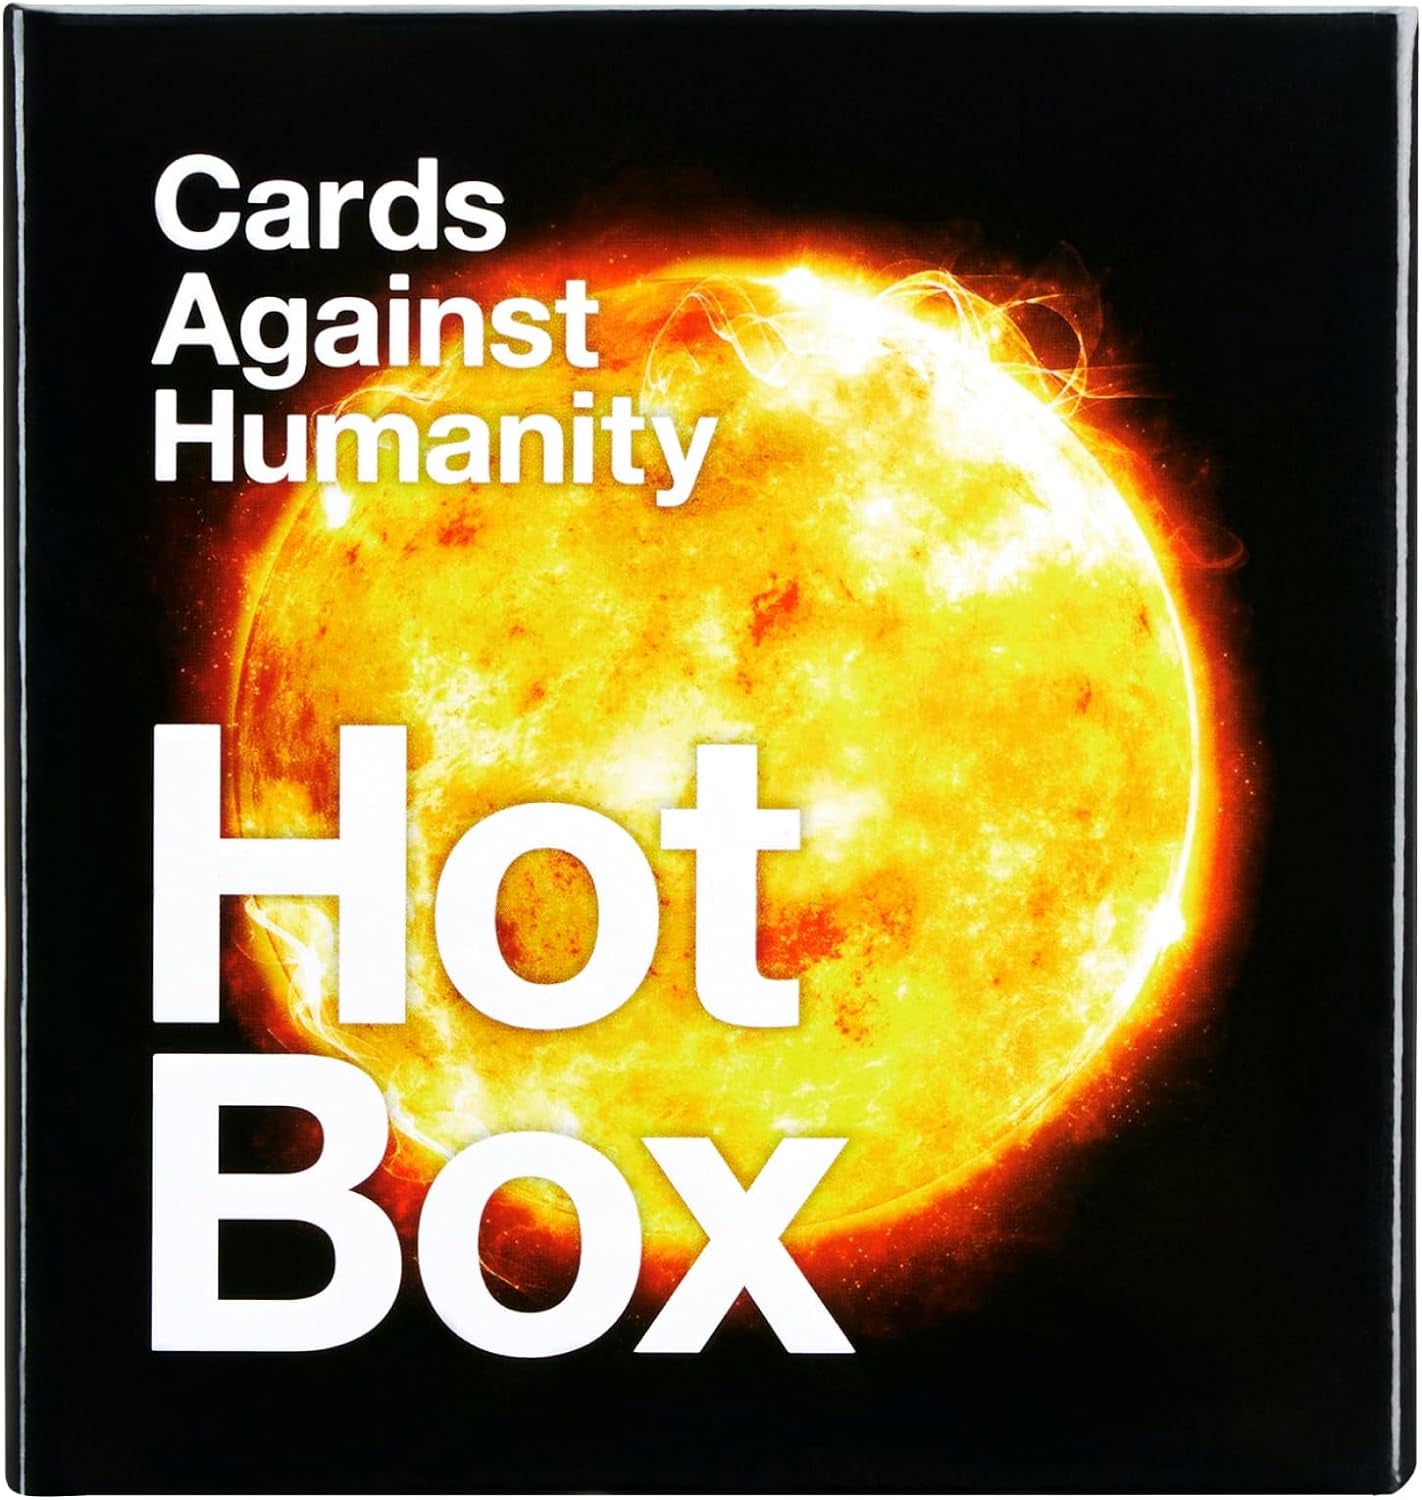 Hot Box • 300-Card Expansion • Newest One